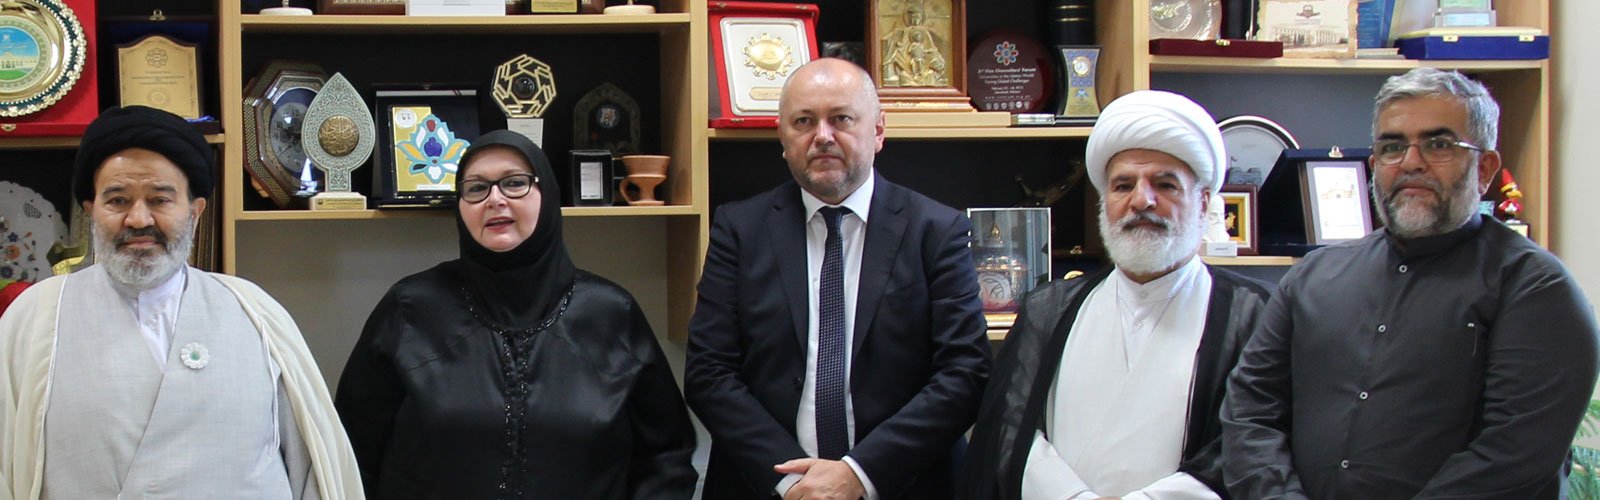 Foreign minister of Bosnia and Herzegovina, Bisera Turković, met with Hujjat al-Islam Sayed Abulhasan Navab at the University of Religions and Denominations on Friday, August 6, 2021. According to the Public Relations Office of the university, Foreign Minister Bisera Turković, the Chairman of the Council of Ministers, and the Vice Prime Minister met with Hujjat al-Islam Sayed Abulhasan Navab, the President of the University of Religions and Denominations. They were welcomed by Hujjat al-Islam Navab: “I am honored to recognize myself as a citizen of Bosnia. I have travelled to Bosnia and Herzegovina more than 50 times, and have done whatever I could for Bosnia and Herzegovina. Bosnia is in our heart. During the conflicts in Bosnia, I got about to martyrdom while visiting the battlefields. I was also in contact with the foreign minister and the defense minister, the late Mr. Rizvan. They were martyred, but I did not have the honor [to be martyred]”. While referring to the academic characteristics of the foreign minister of Bosnia, he continued: today is a historical and memorable day for the University of Religions and Denominations. In fact, hosting any Bosnian figure at our university would be an honor for us. I feel that your presence here is a great opportunity for us and for the people of Bosnia. He later introduced the University of Religions and Denominations as an international university and indicated: this is the only university of religions and denominations in the world. In view of this university, the interfaith dialogue is an essential matter in today’s human life. Great people such as Professor Hamid Algar have also acknowledged this fact. The University of Religions and Denominations is an honor to the Seminary and Iran. Three quarters of our students are international students from 40 countries, and this number is increasing. The University of Religions and Denominations has 14 faculties. Expressing happiness being at the University of Religions and Denominations, Ms. Turković also mentioned: I deeply believe that without Iran’s presence in Bosnia in the most difficult situations, Bosnia would have never been in today’s conditions. The support of the Iranian people has been invaluable. Turković further commemorated the martyrs in Bosnia war and said: with great sadness, we honor the memory of the Iranian martyrs in Bosnia, whose blood along with the blood of Bosnian martyrs, deepened these relations and strengthened the foundation of the newly established country of Bosnia. Bosnia will never be able to compensate or pay for the Iranian martyrs, whose blood saved the people and country of Bosnia. During the war in Bosnia, I was in Croatia as the first ambassador on behalf of Ali Ezzat Begović and witnessed Iran's aid to Bosnia. I affirm your words regarding the important and sacred goals in establishing this great university and the importance of interfaith dialogue. To me, the interfaith dialogue is the most important matter in today’s world. In addition to Bisera Turković, other figures were also present in this meeting including the ambassador of the Republic of Bosnia, the president of Iran-and-Bosnia Friendship Association, and a number of university authorities. At the end of the meeting, President Hujjat al-Islam Navab presented the special plaque of the university to Ms. Turković, while wearing the remembrance poppy pin for the Bosnian martyrs woven by the martyrs’ mothers. This remembrance symbol is considered as the most important symbol in Bosnia.